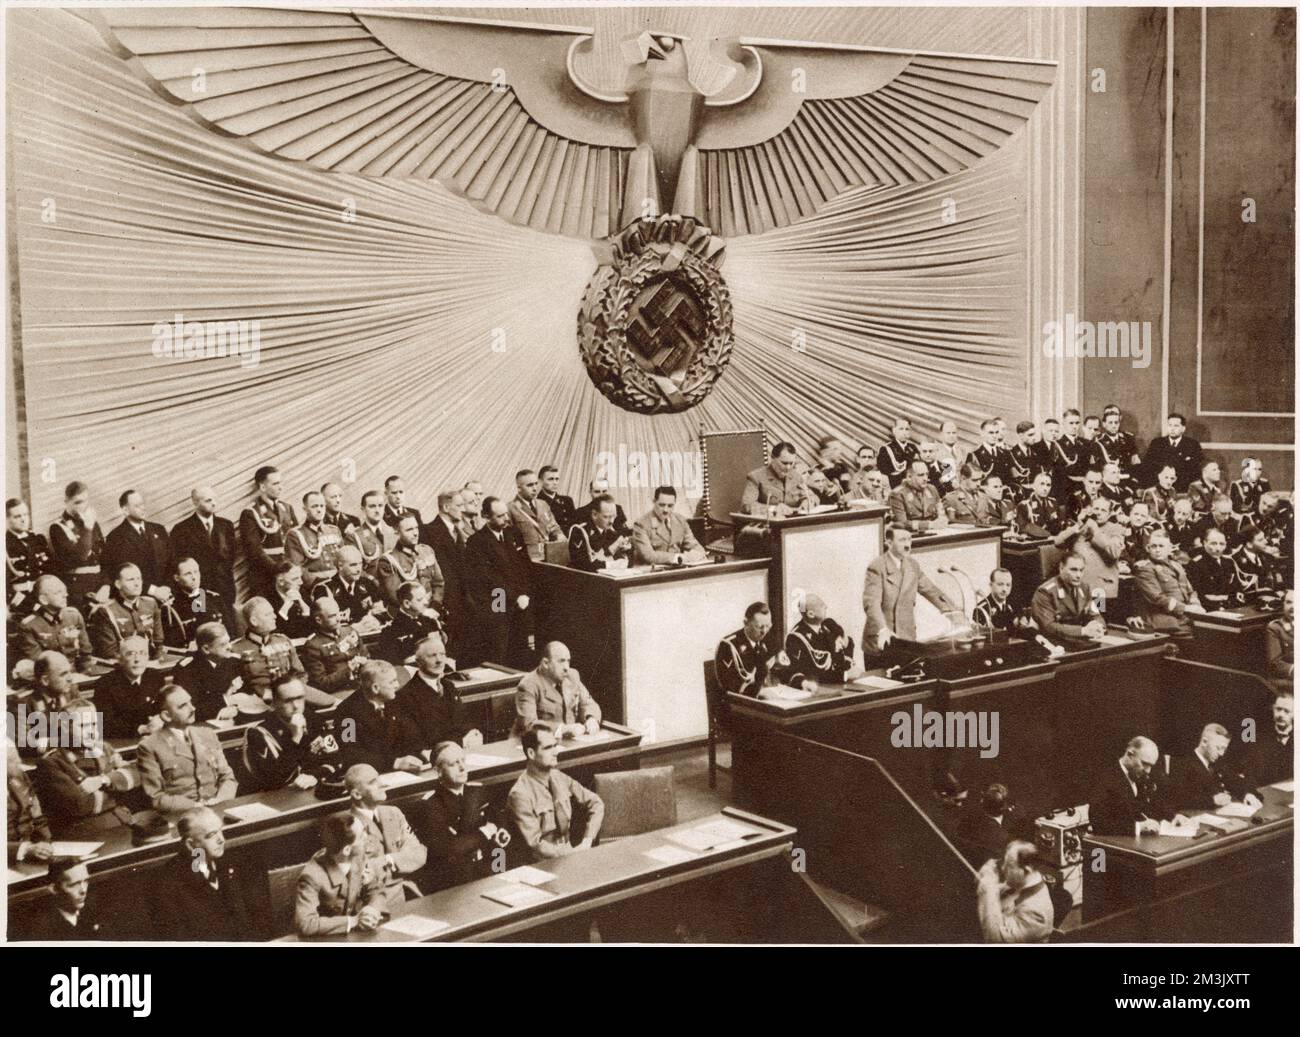 Adolf Hitler addressing the first meeting of the Greater German Reichstag in the Kroll Opera House, Berlin, 30th January 1939.   The giant eagle in the background is representative of the Nazi's control of the Reichstag and the power of the 'Fuhrer', Adolf Hitler. Stock Photo